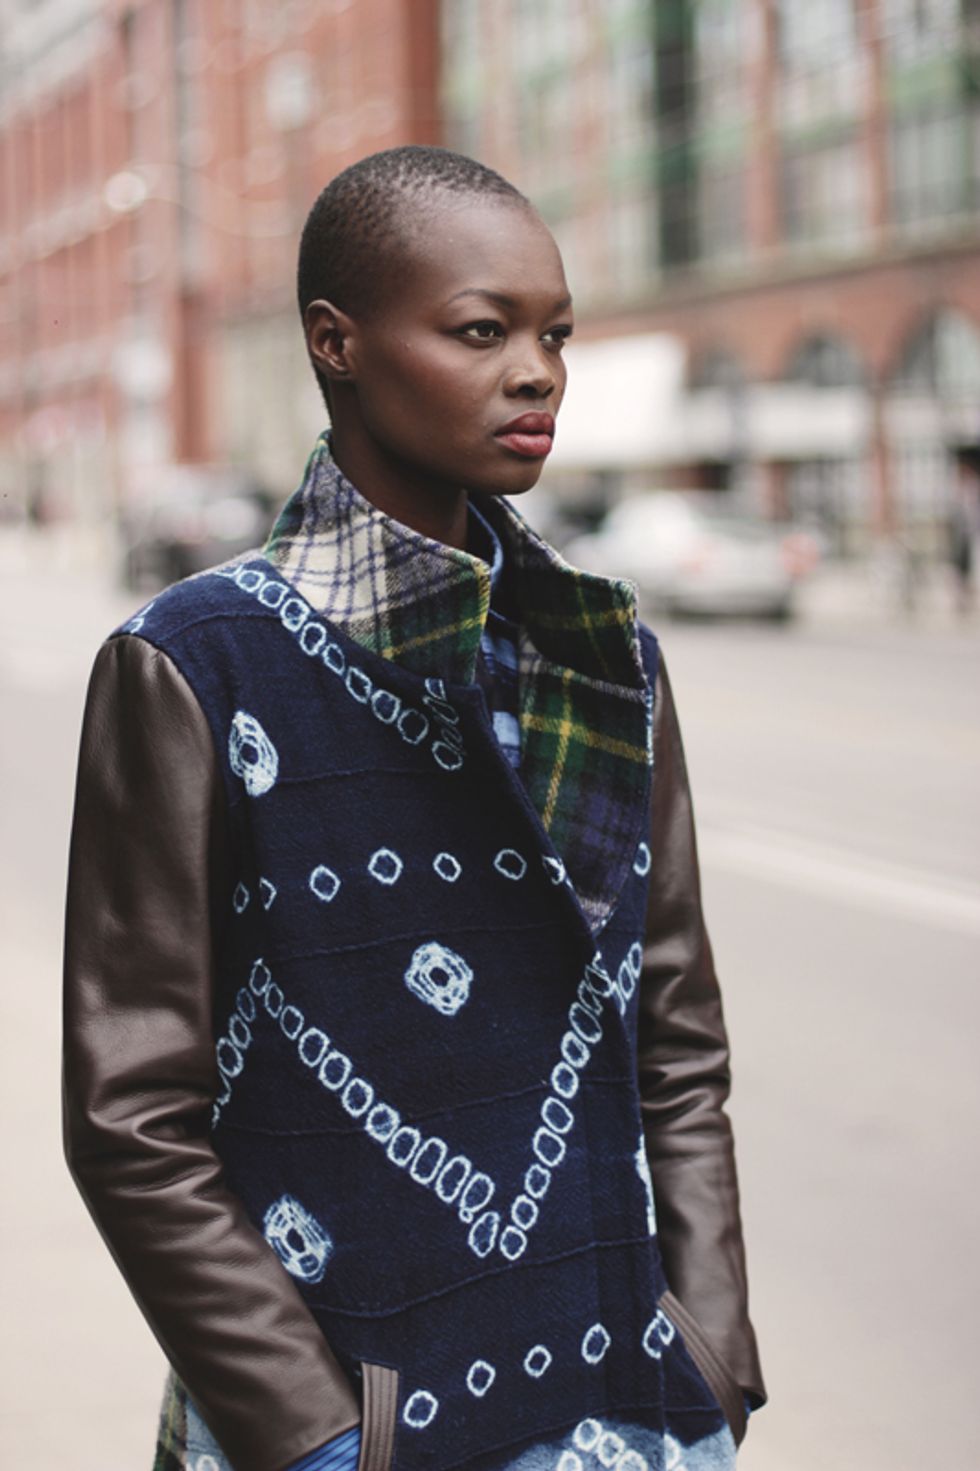 South Sudanese Model Aluad Deng Anei Stars In Chinedesign's Winter Lookbook